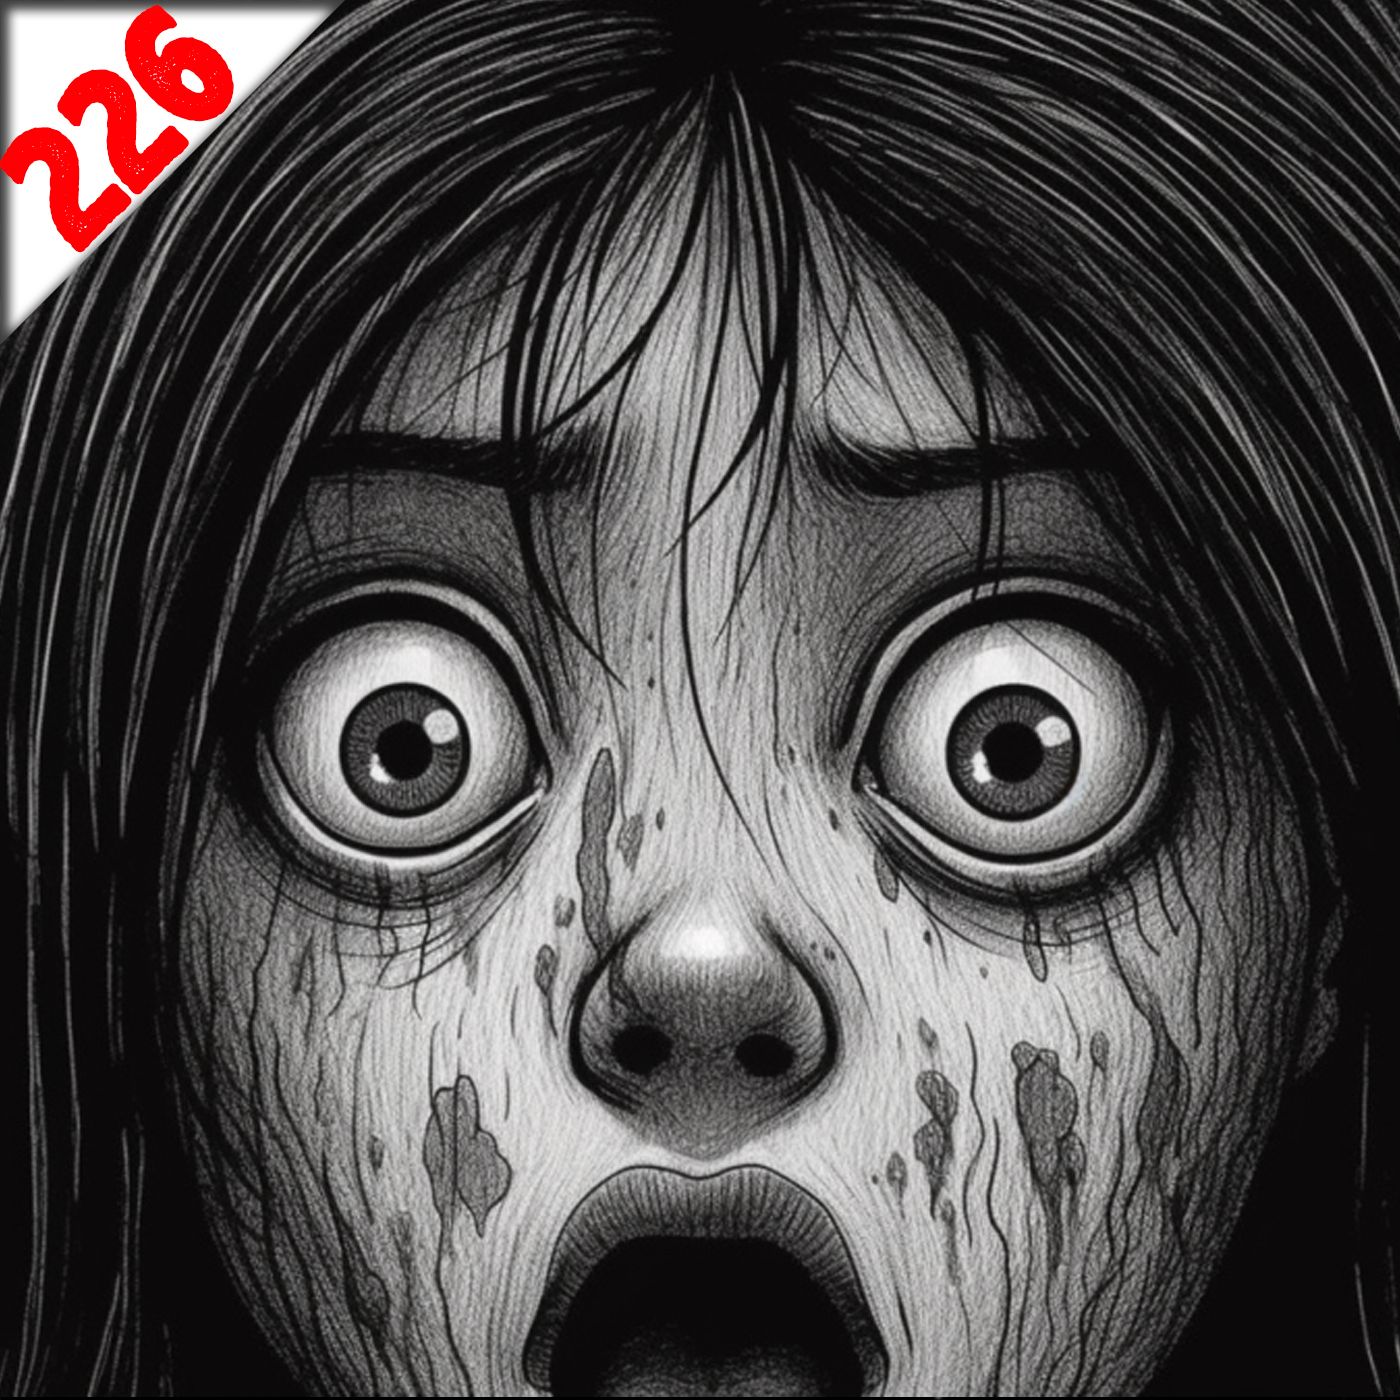 238: THANK GOD I TRUSTED MY GUT | 38 True Scary Stories | EP 226